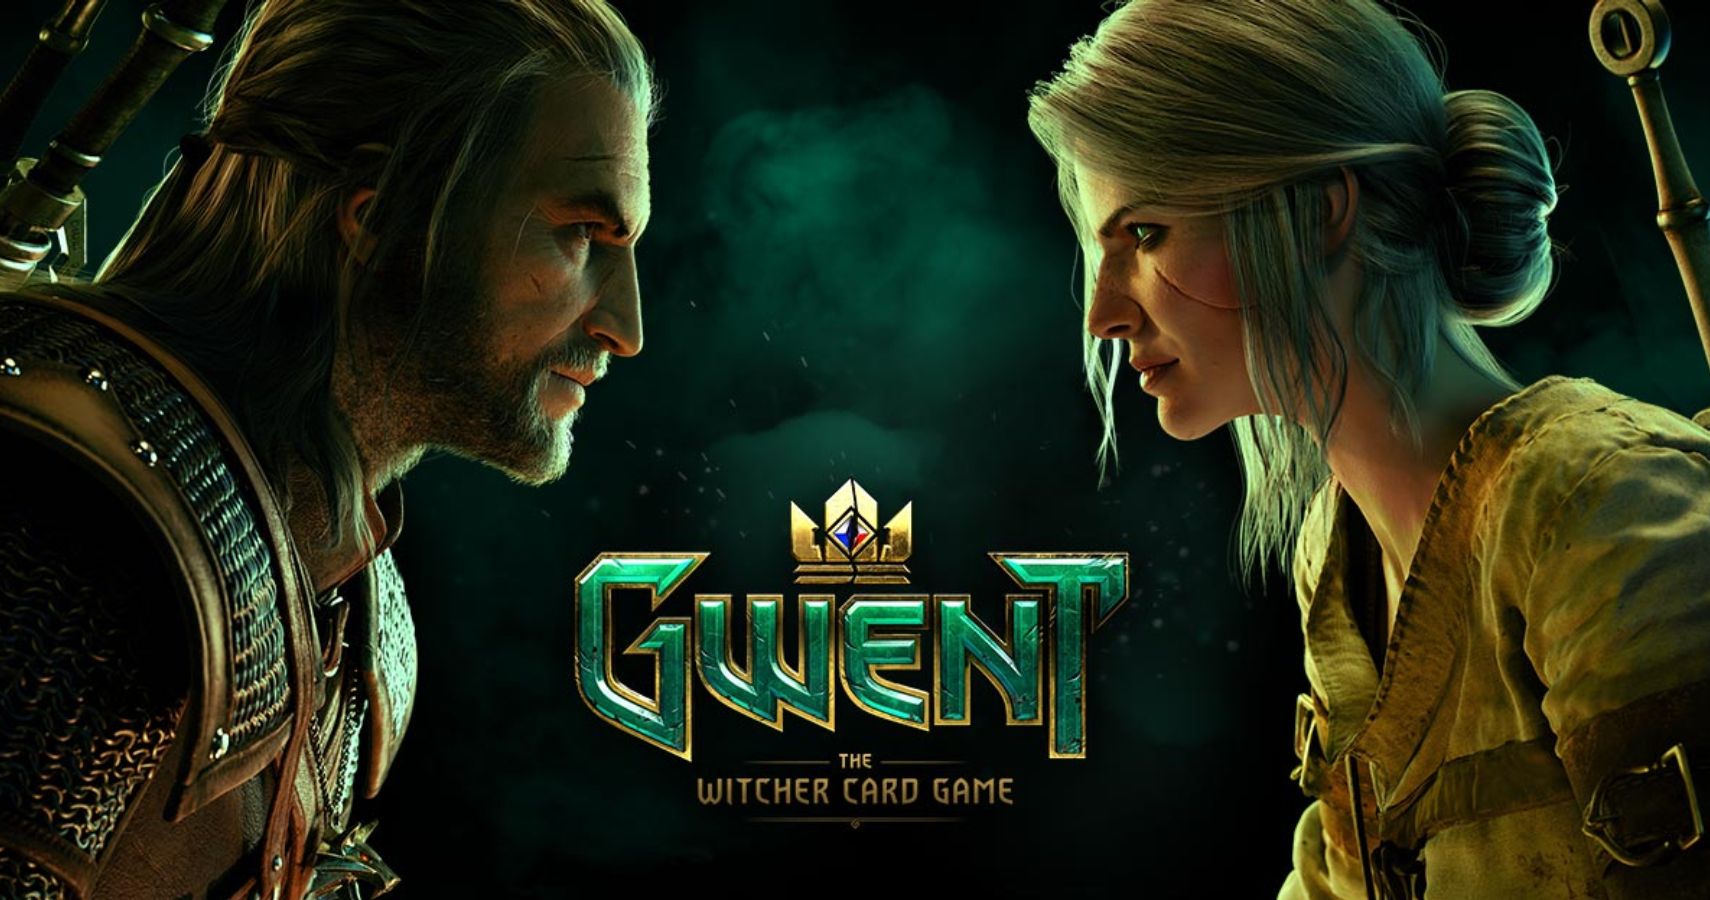 Gwent Is Now Available On Steam